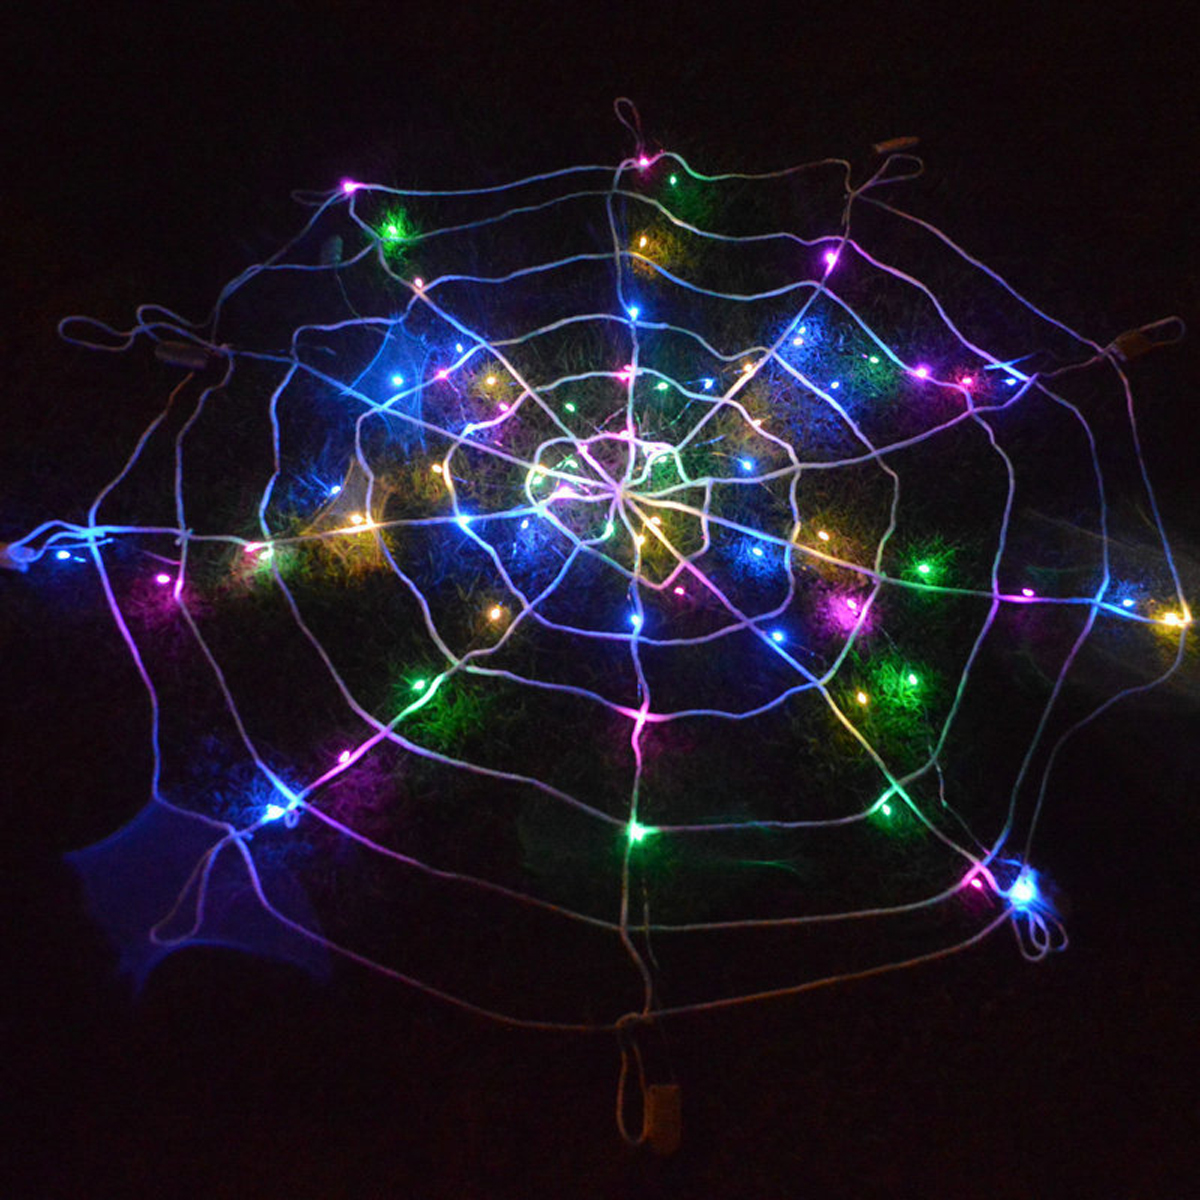 Halloween-LED-Spider-Web-String-Light-Outdoor-Horror-Party-Props-Lamp-Cobweb-Spooky-Decor-1754369-10